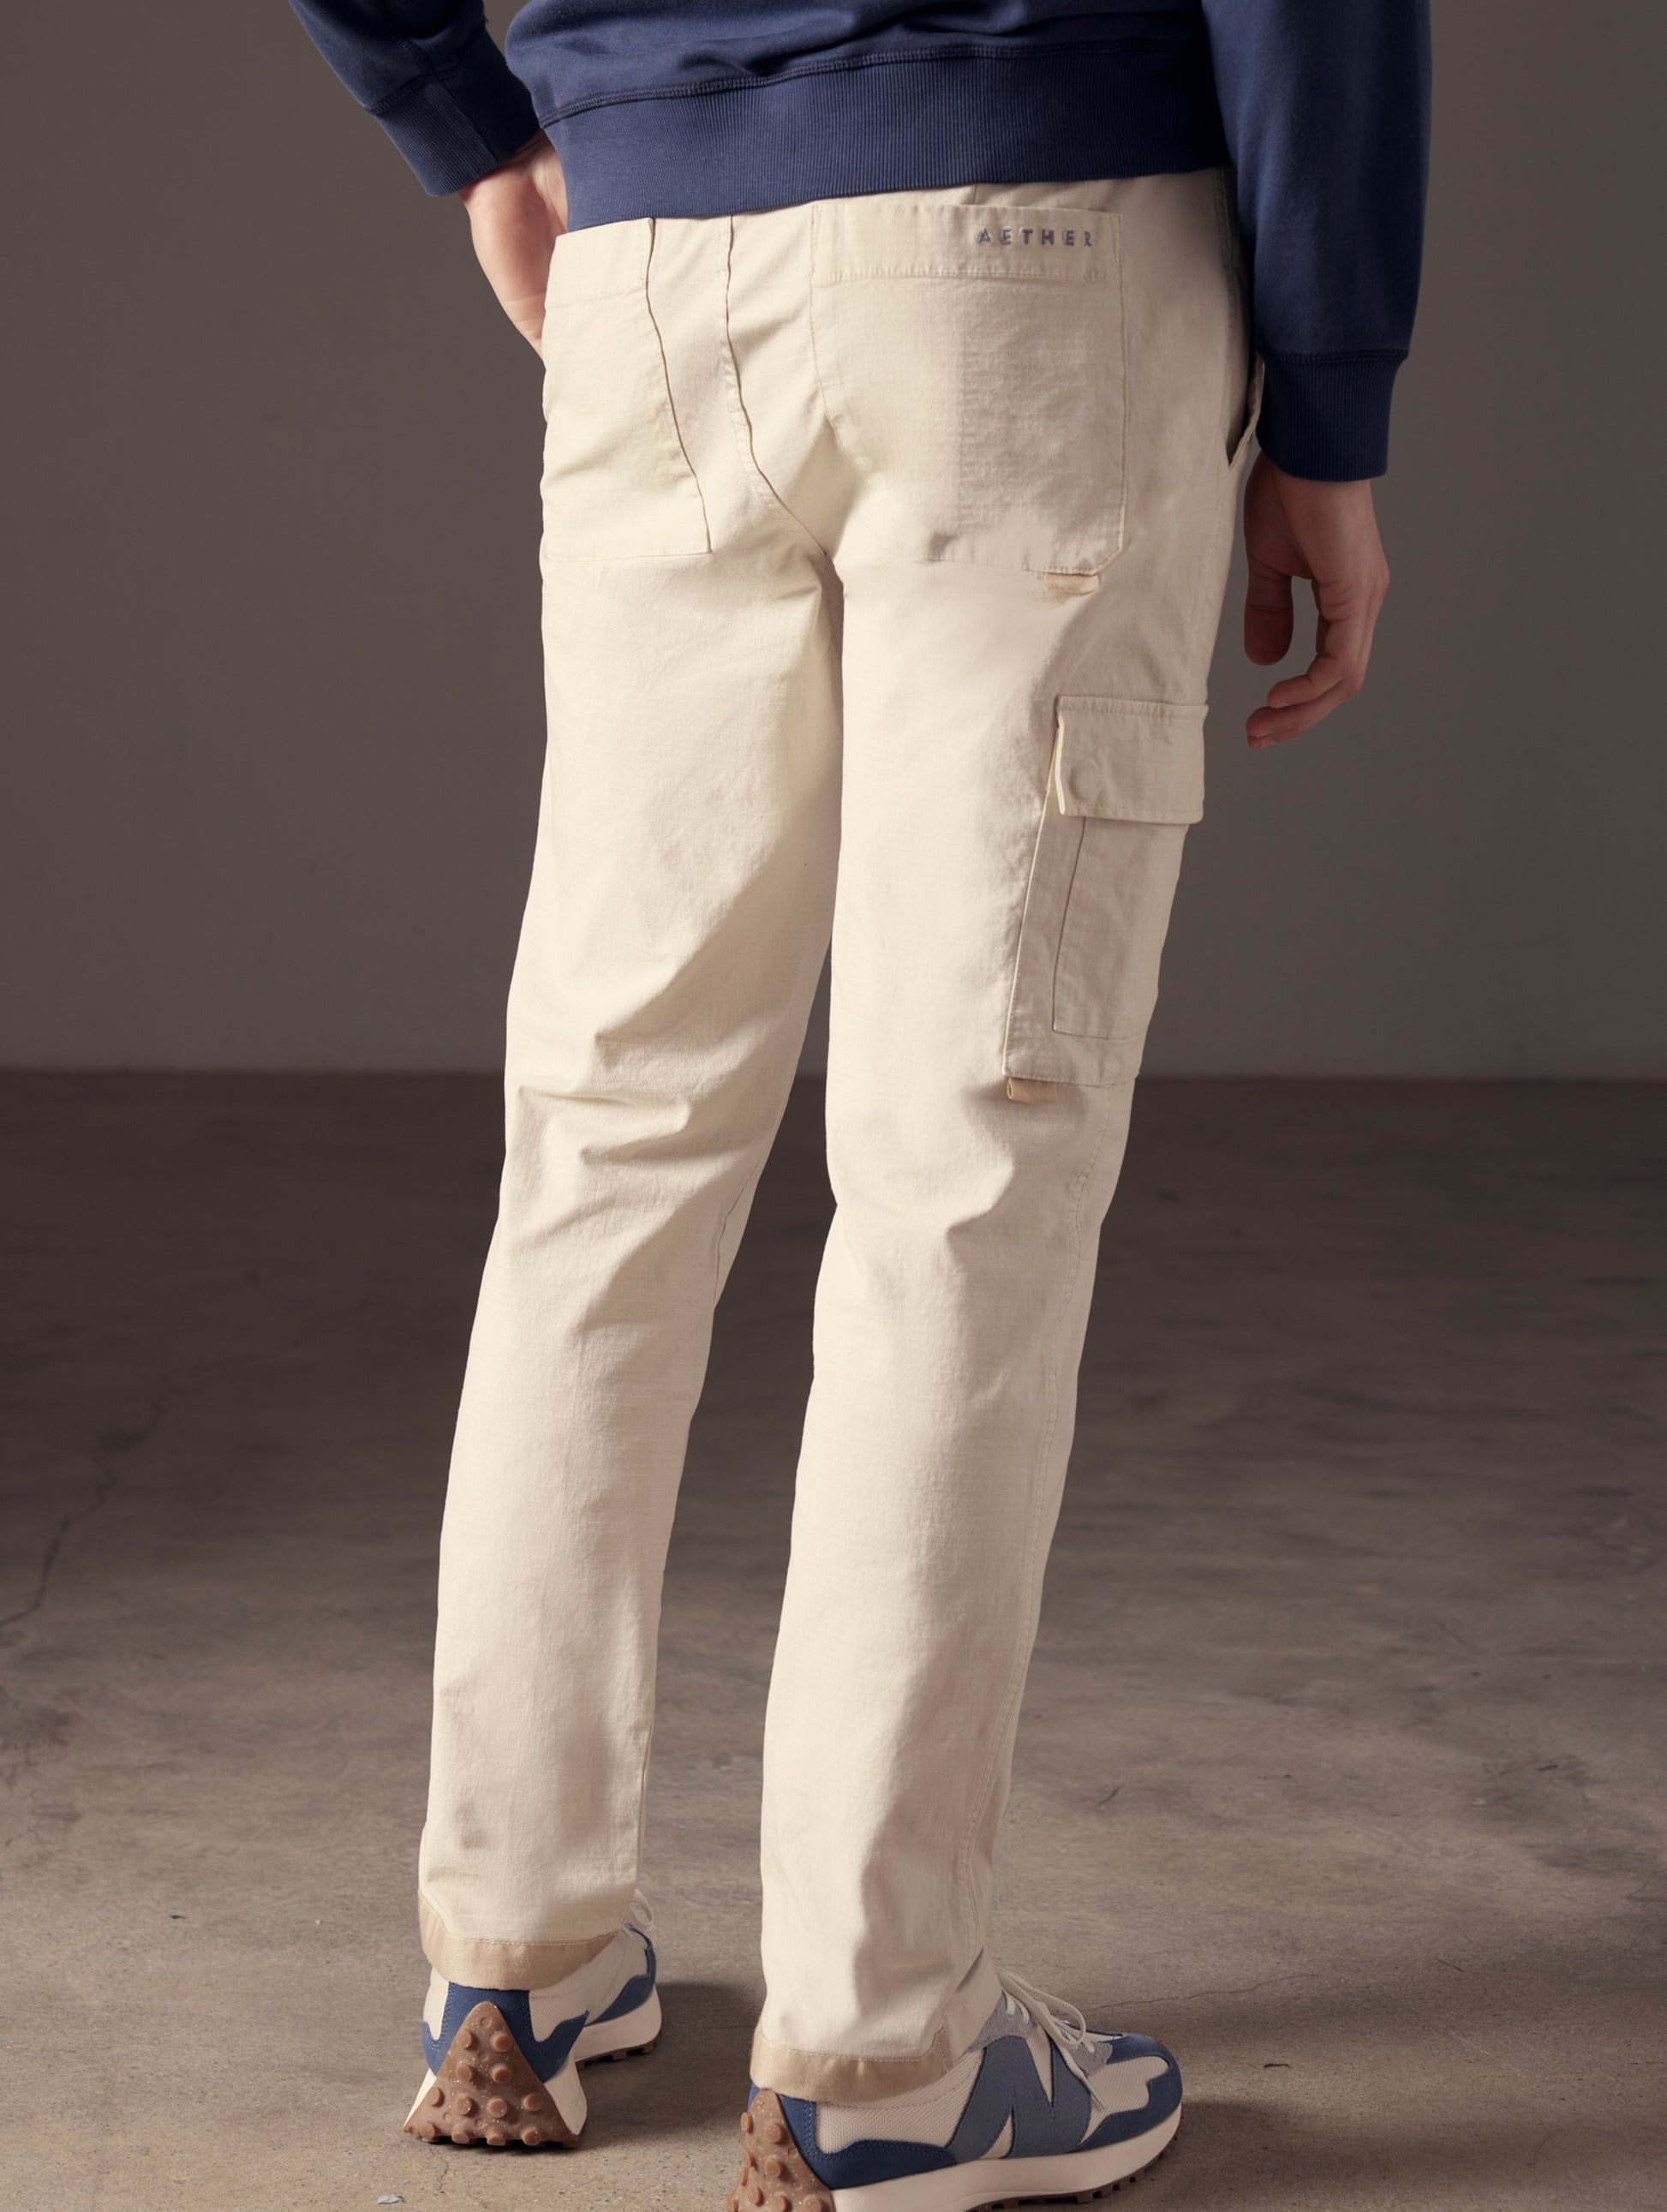 back view of man wearing beige cotton ripstop pants